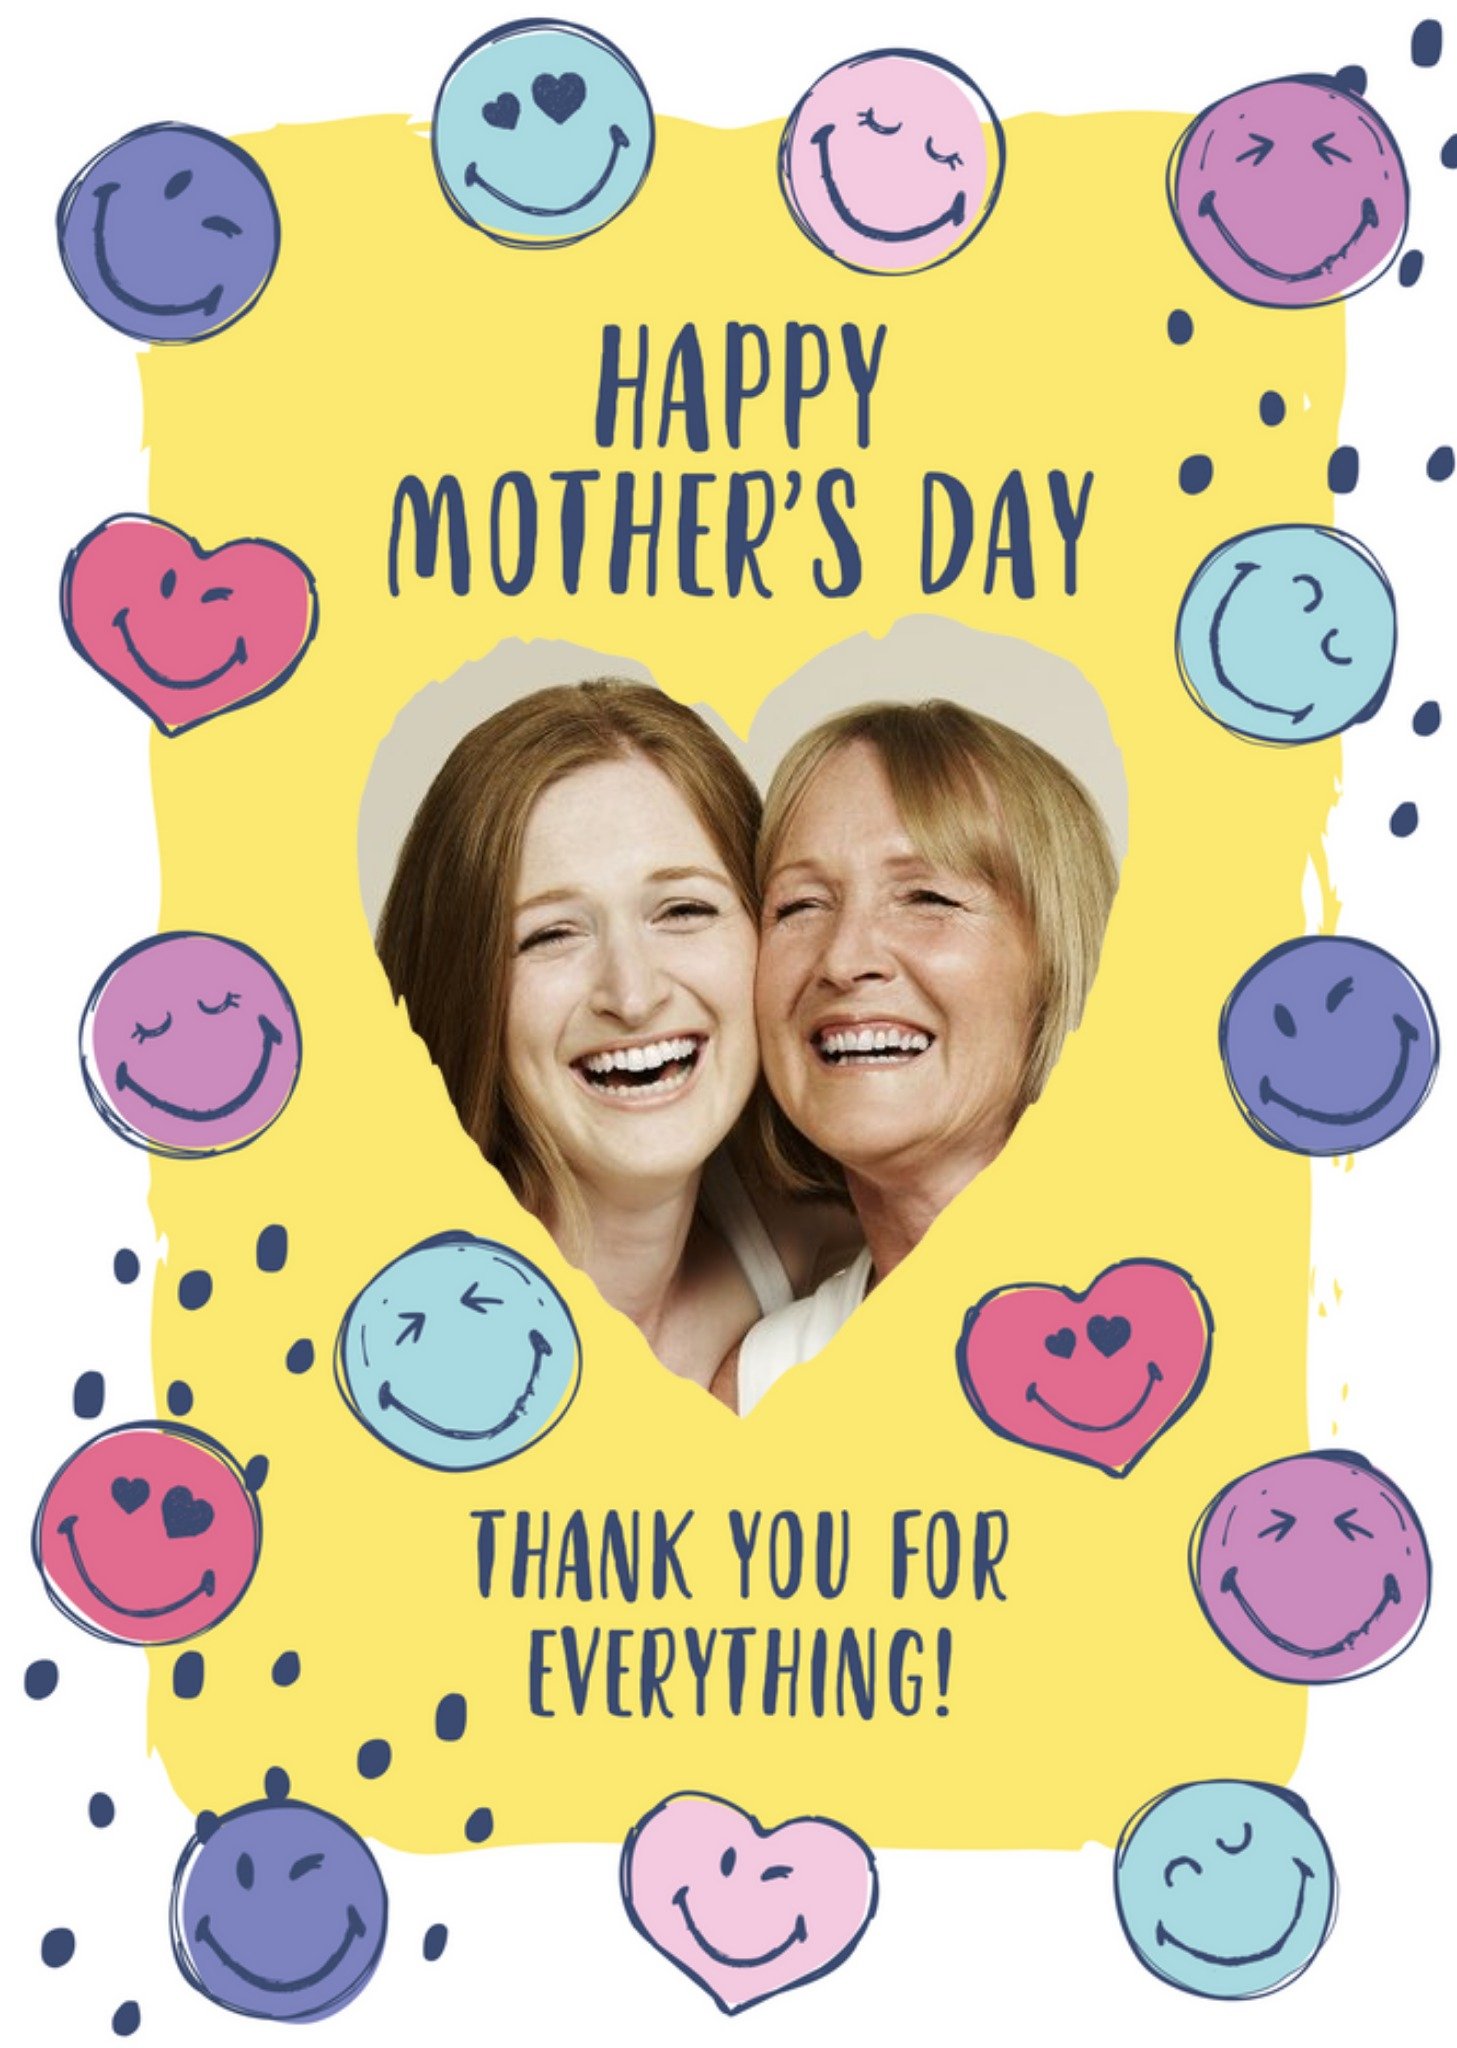 Moonpig Smiley World Me And You Love Heart Photo Upload Mothers Day Card, Large